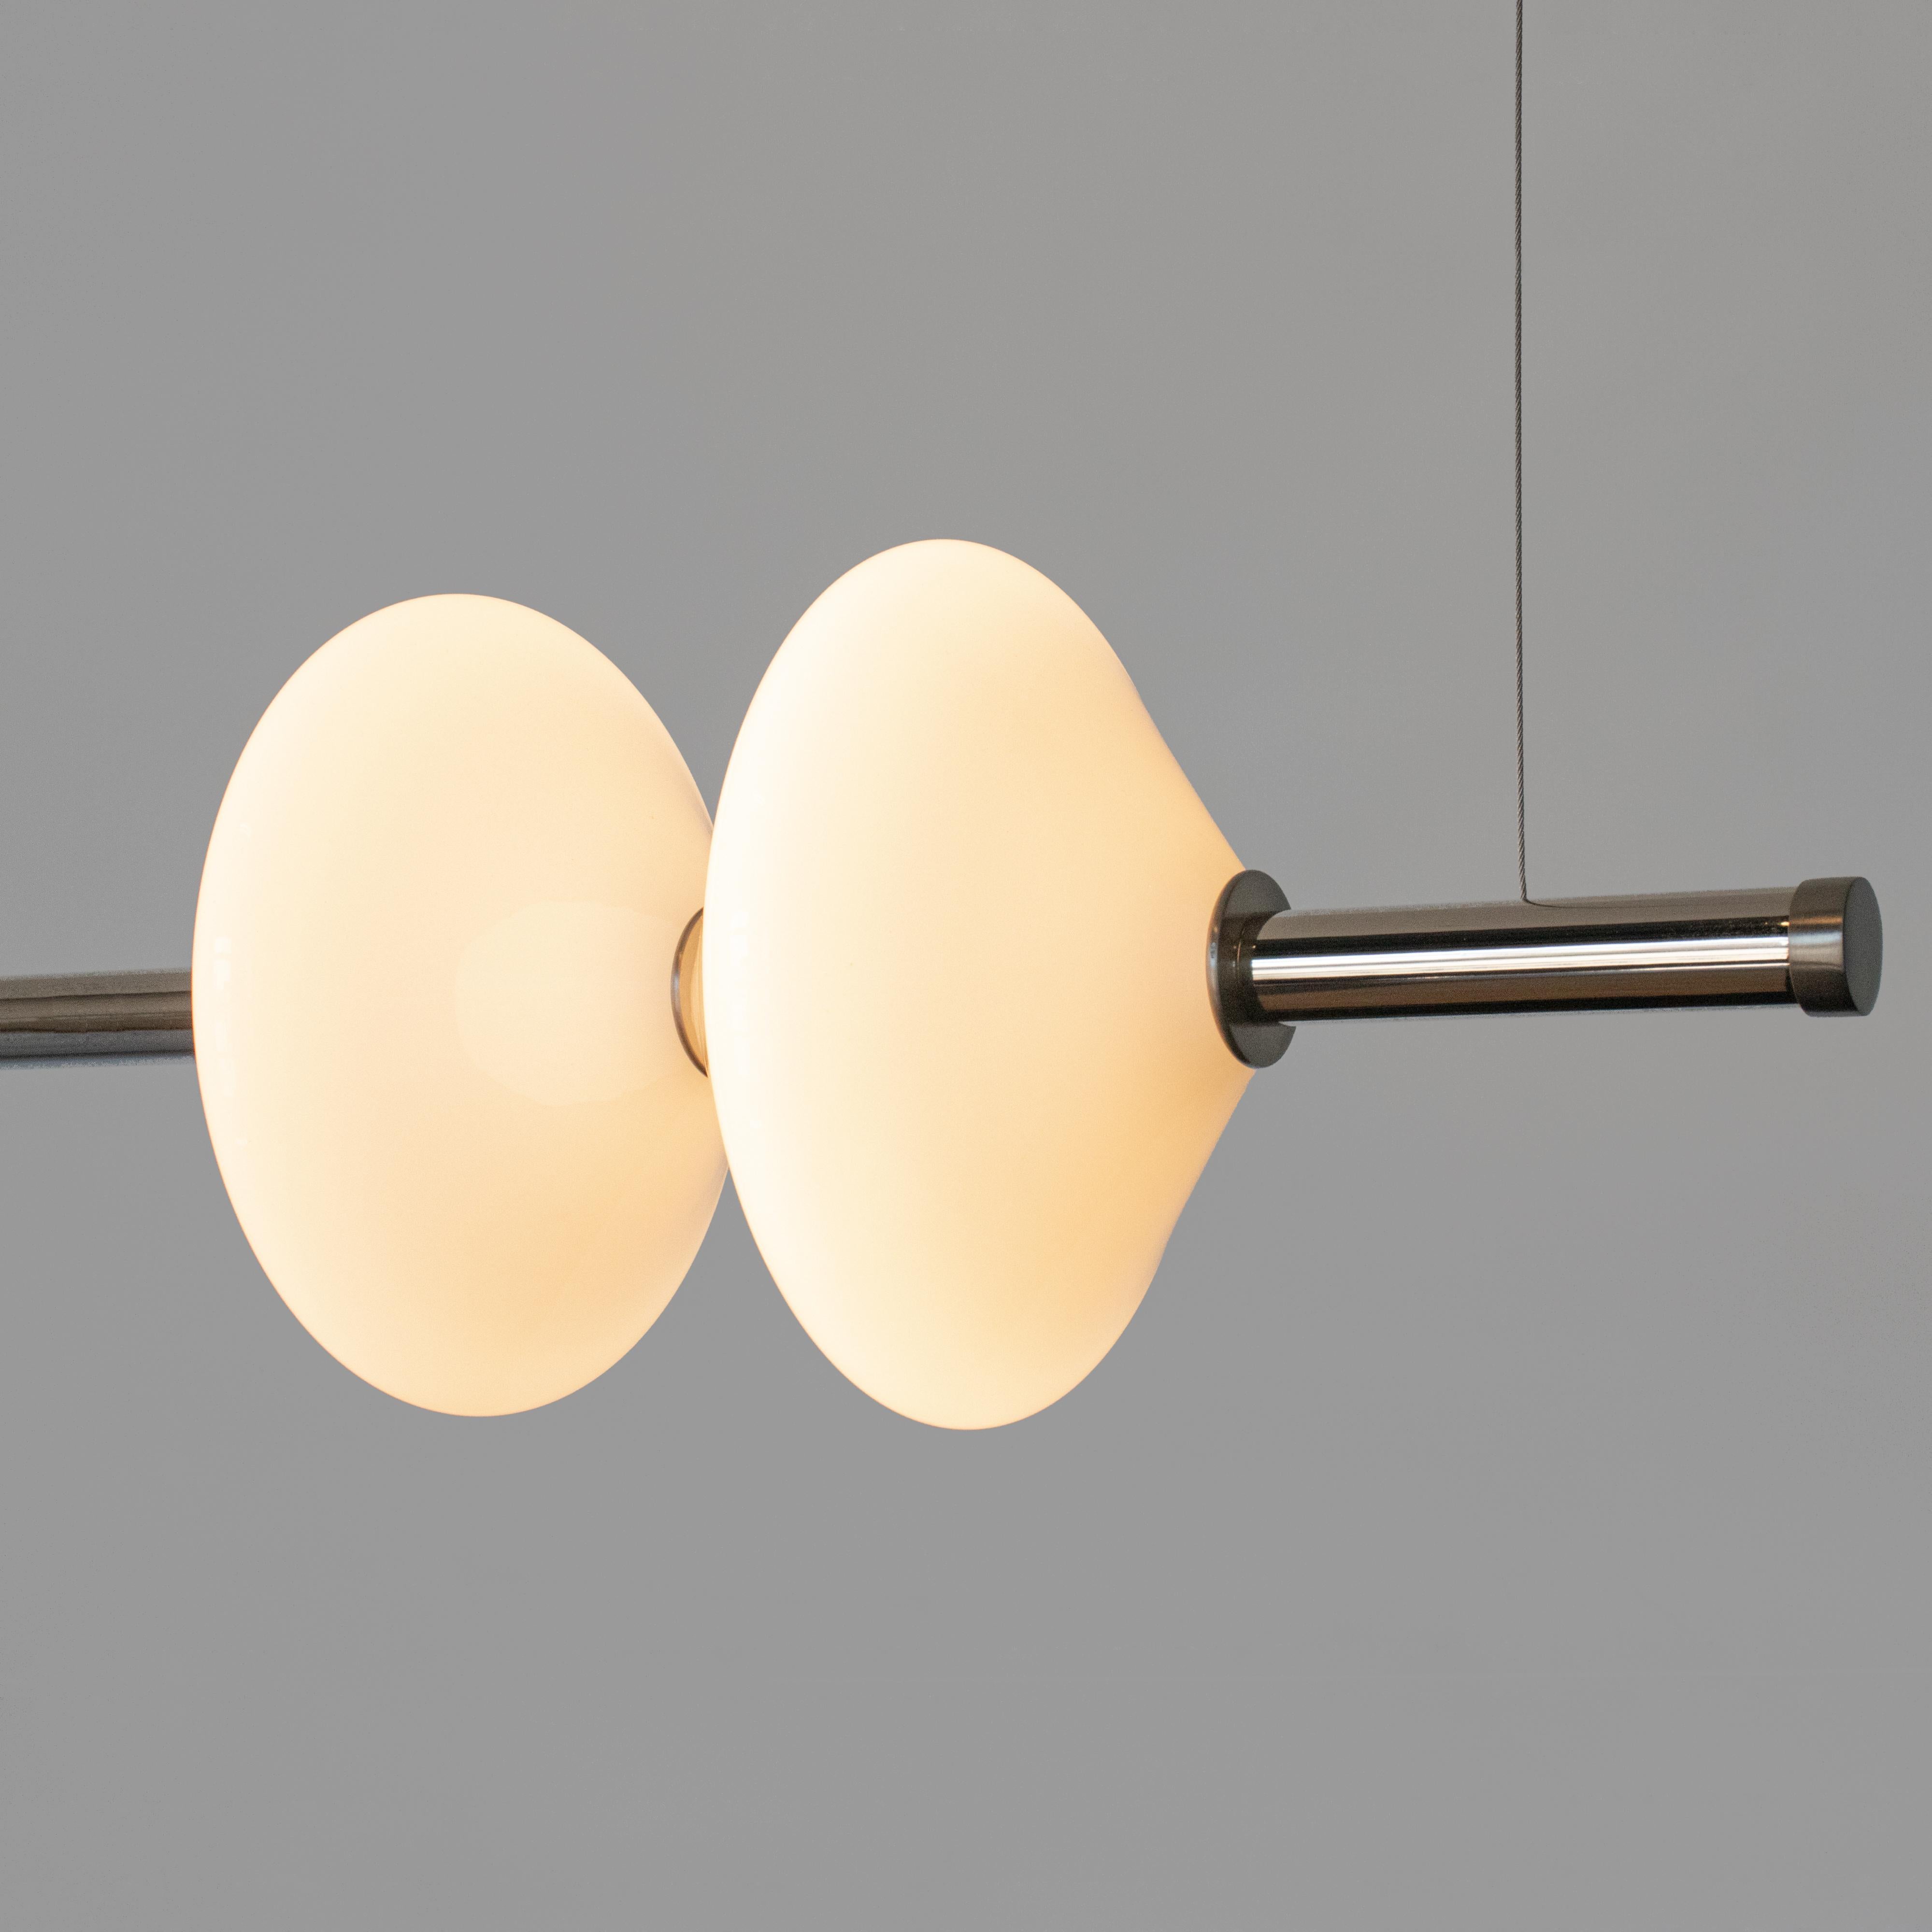 The GEM 2 linear pendant is built of brass with an LED light source that is diffused by a hand-blown opal white glass diffuser. This pendant works as an individual fixture or can be installed in larger groupings to create a dynamic installation. Use